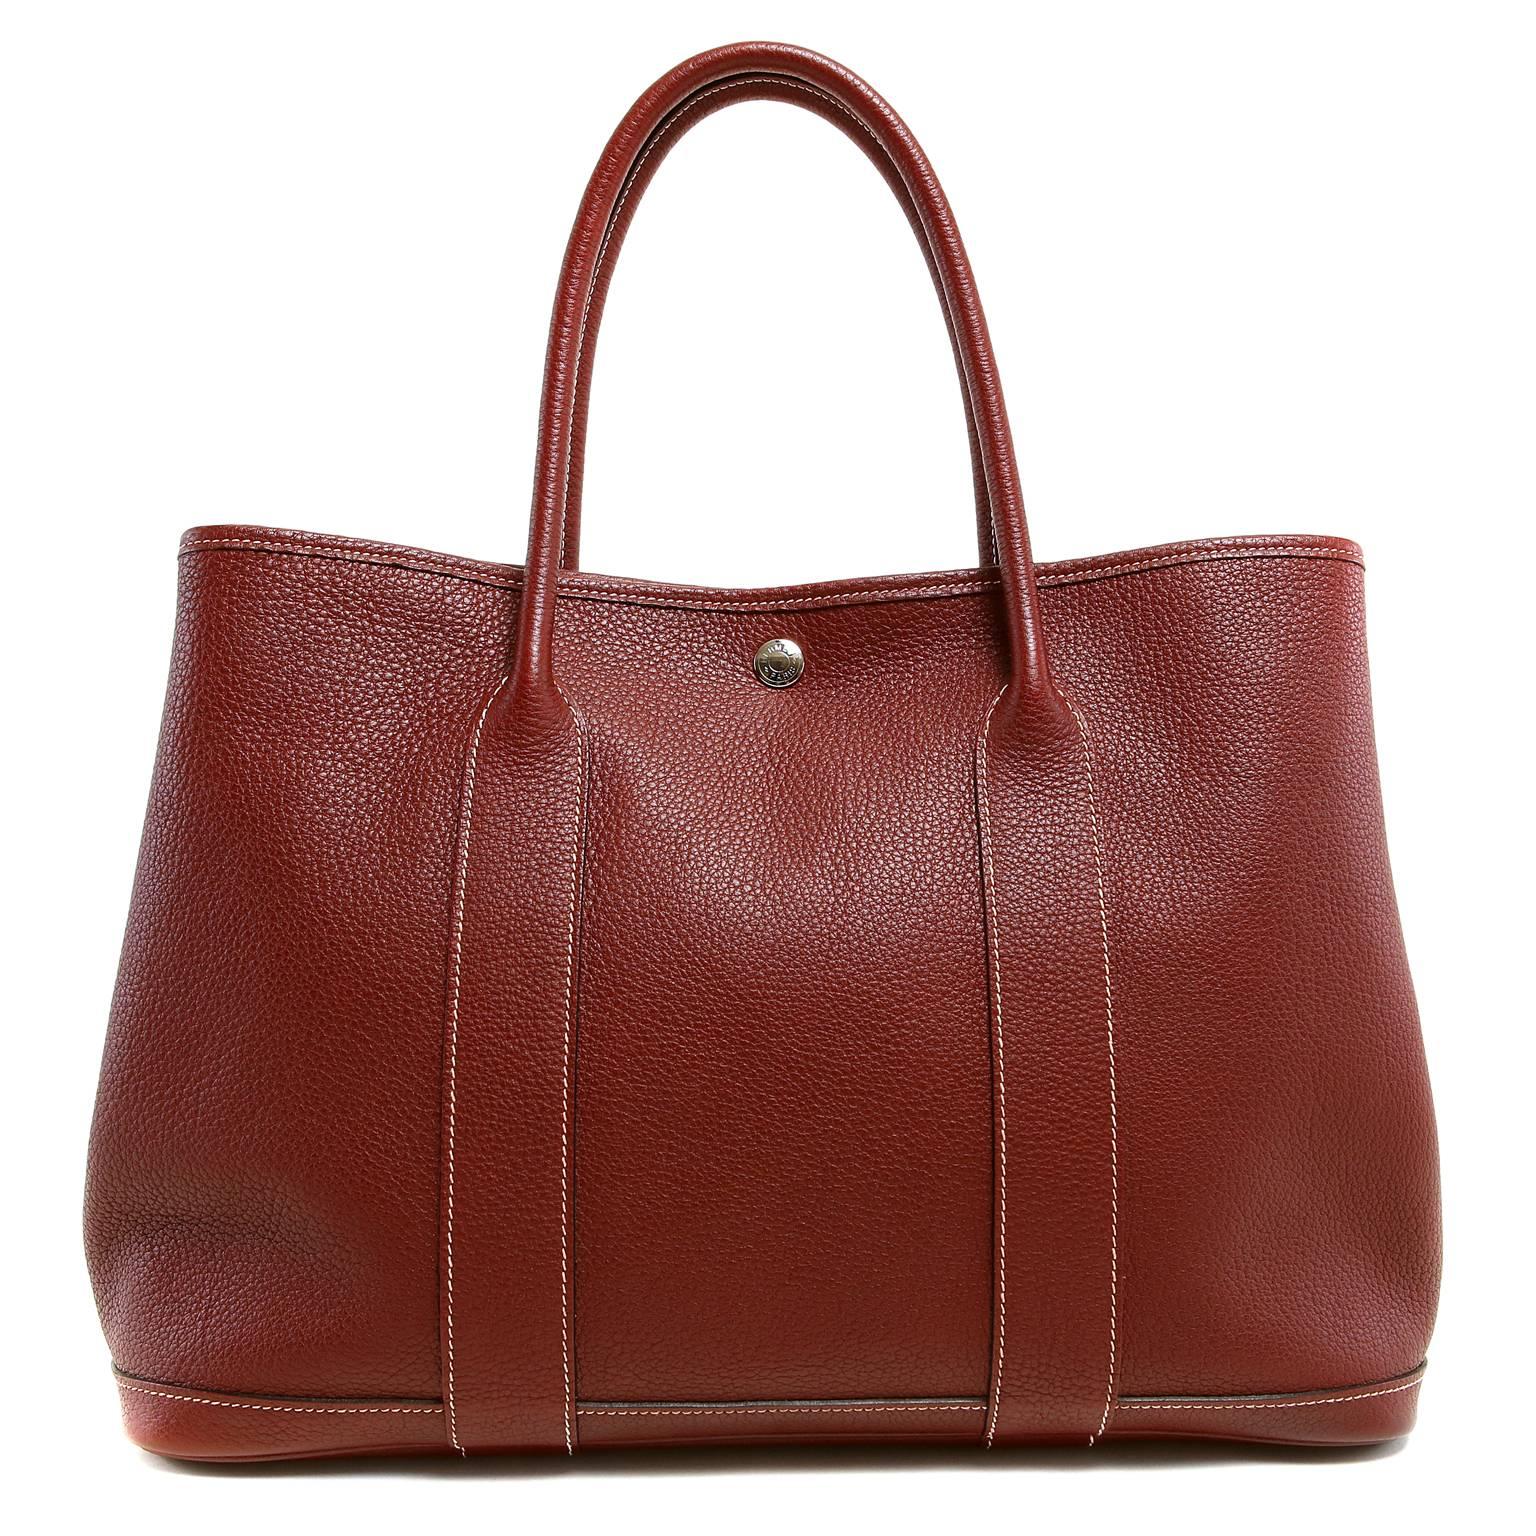 Brown Hermès Bordeaux Leather Garden Party Tote